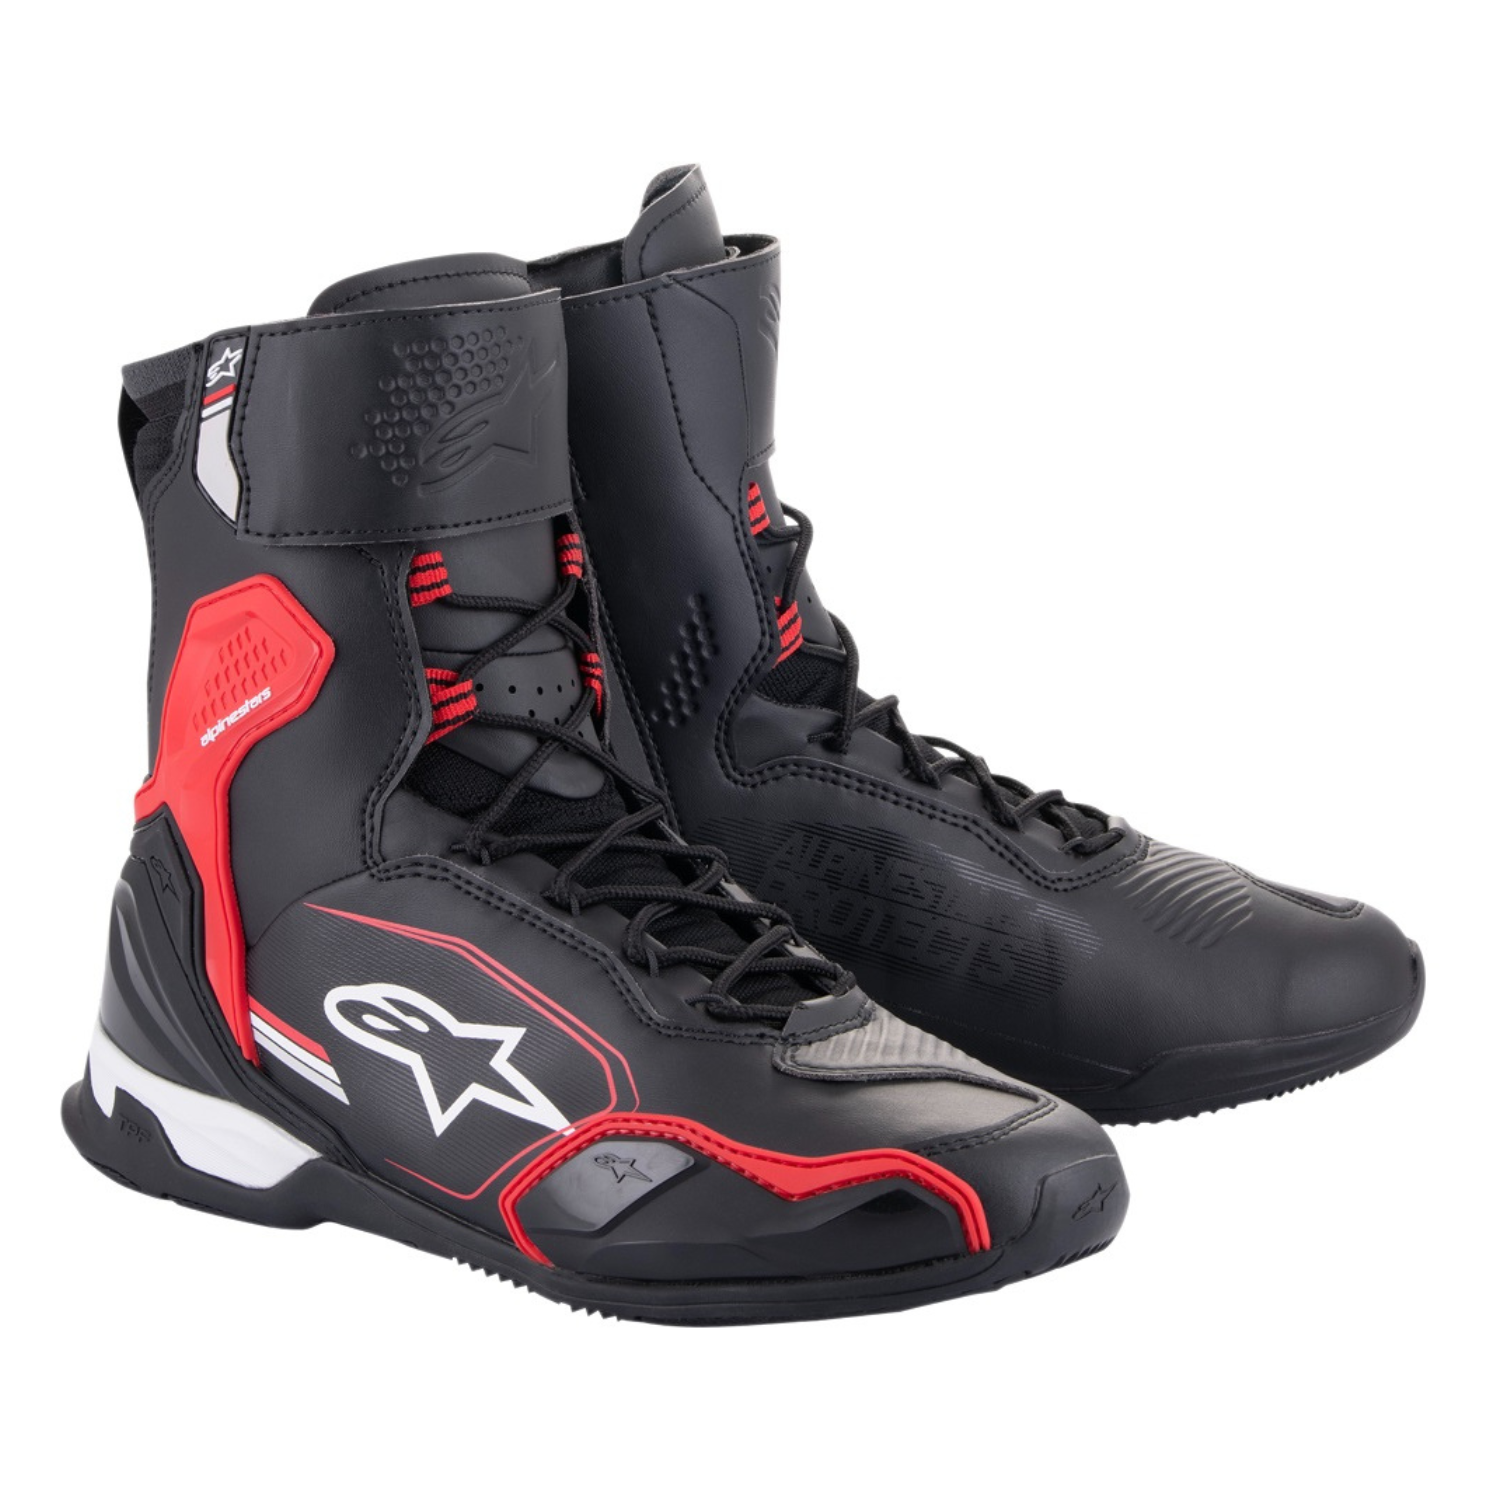 Image of EU Alpinestars Superfaster Shoes Black Bright Red White Taille US 8